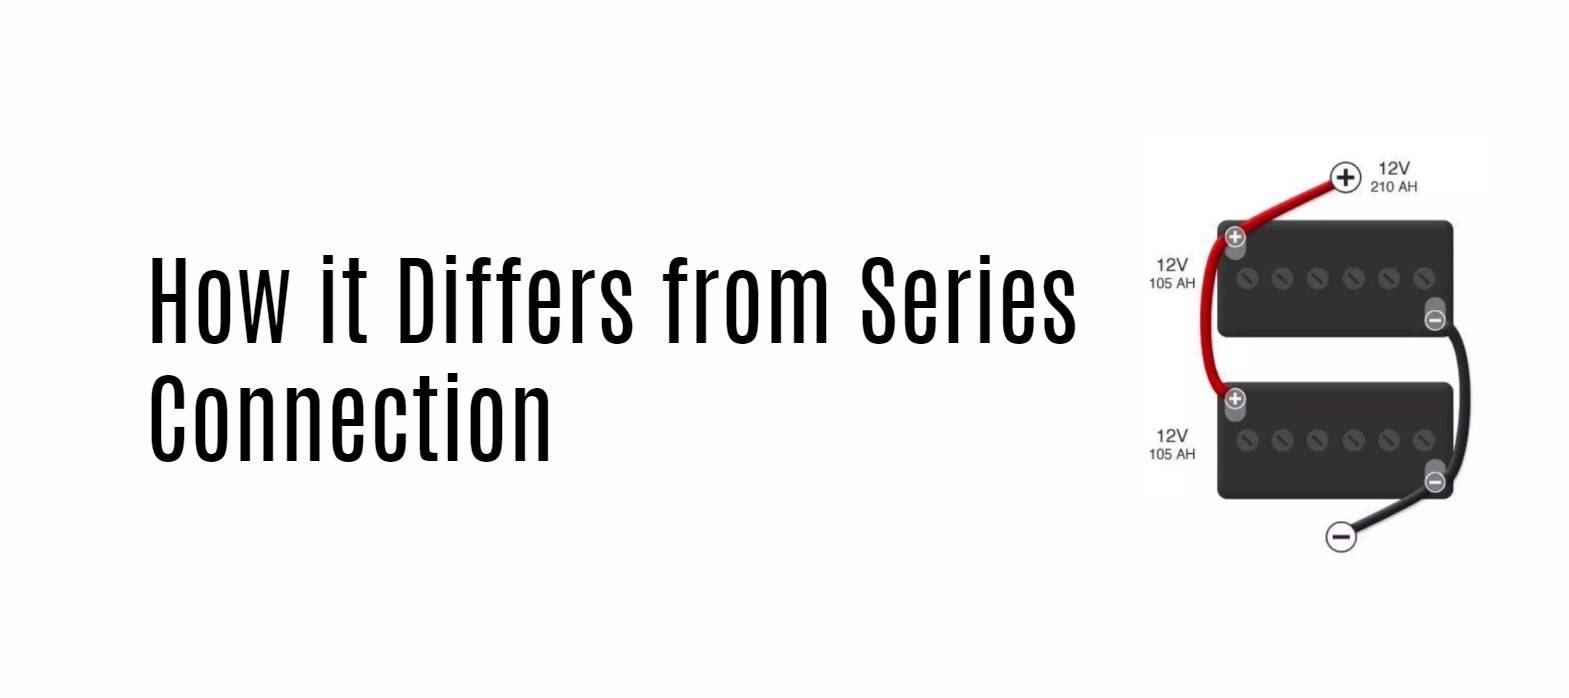 How it Differs from Series Connection